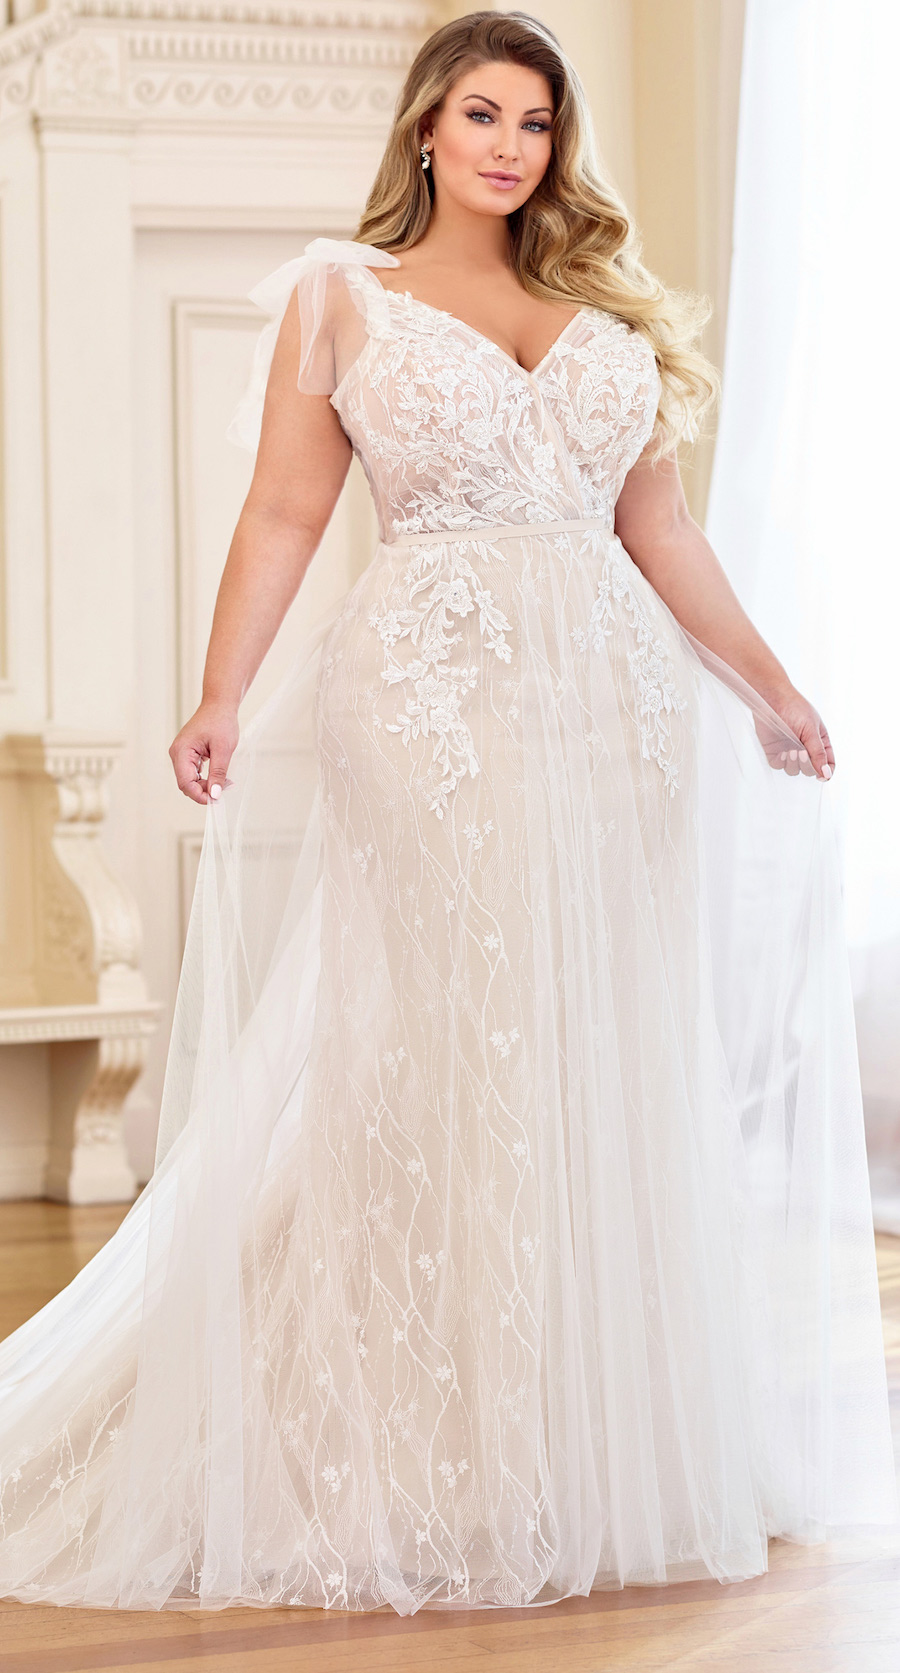 Plus Size Wedding Dresses For The Most Beautiful And Curvy Brides | My ...